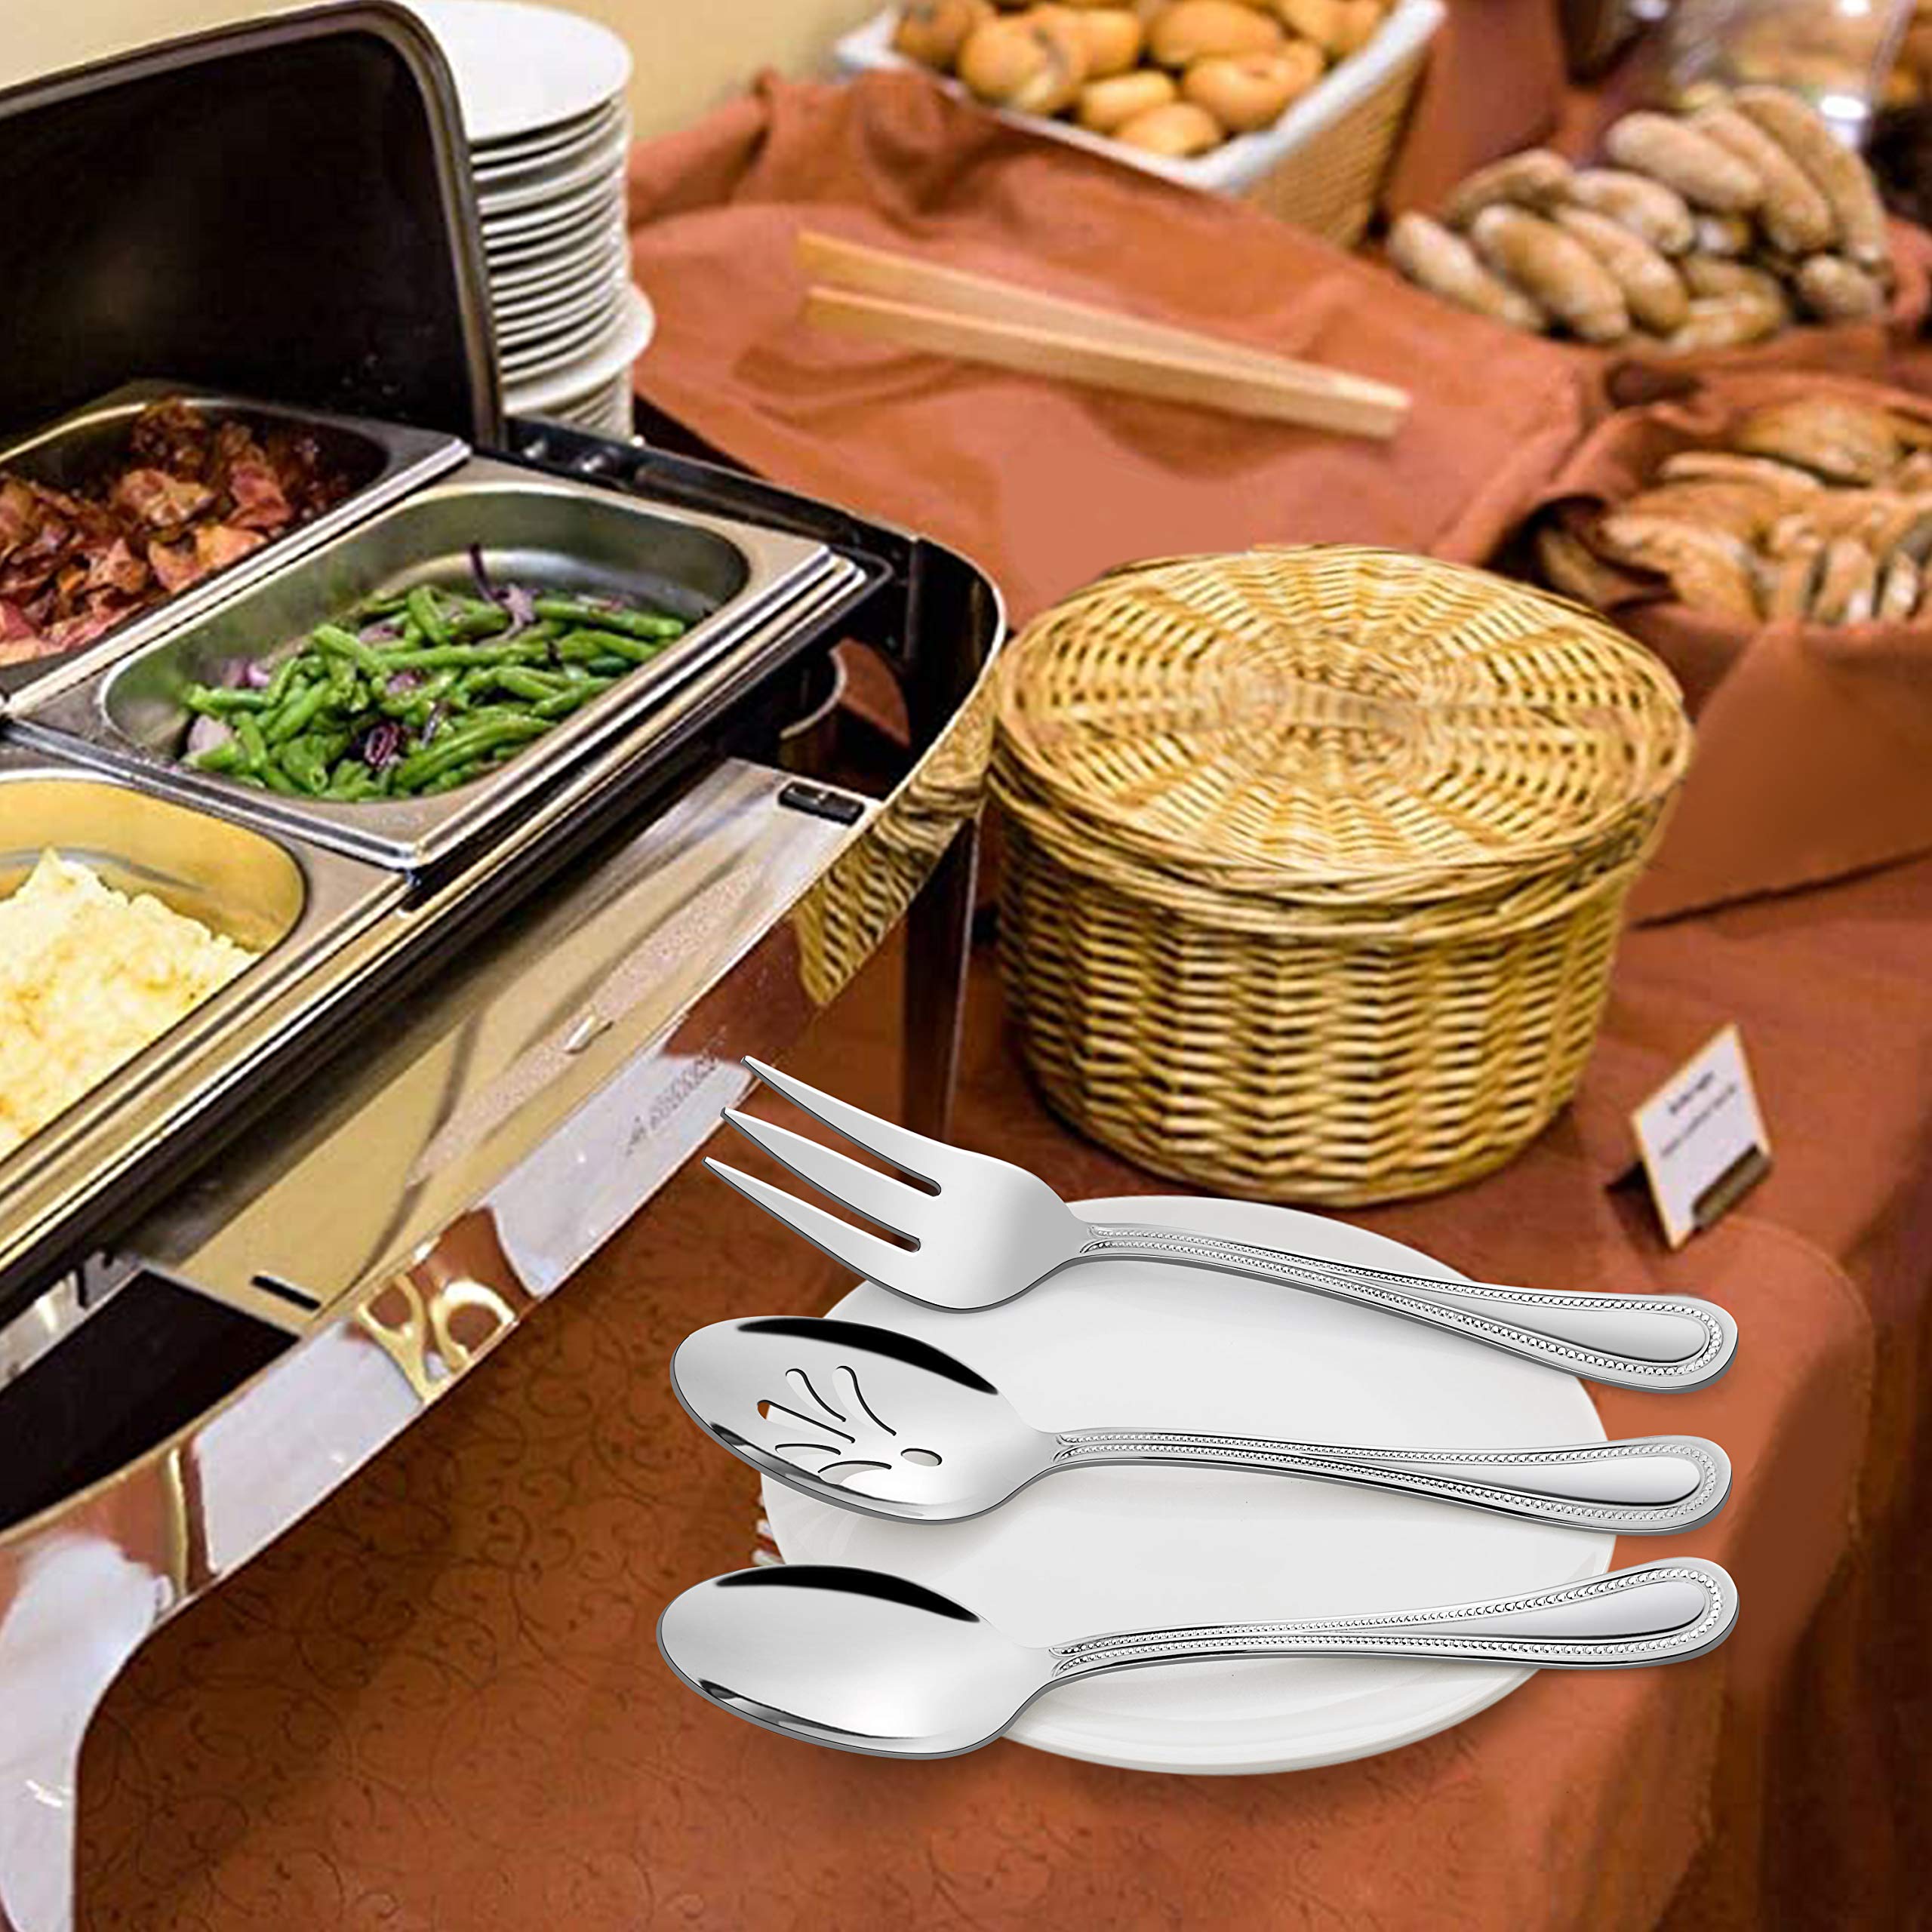 Serving Utensils, HaWare Stainless Steel Silverware Serving Set 5 Pieces, Pearled Edge Hostess Serving Set for Buffet Party Kitchen Restaurant, Mirror Finished & Dishwasher Safe